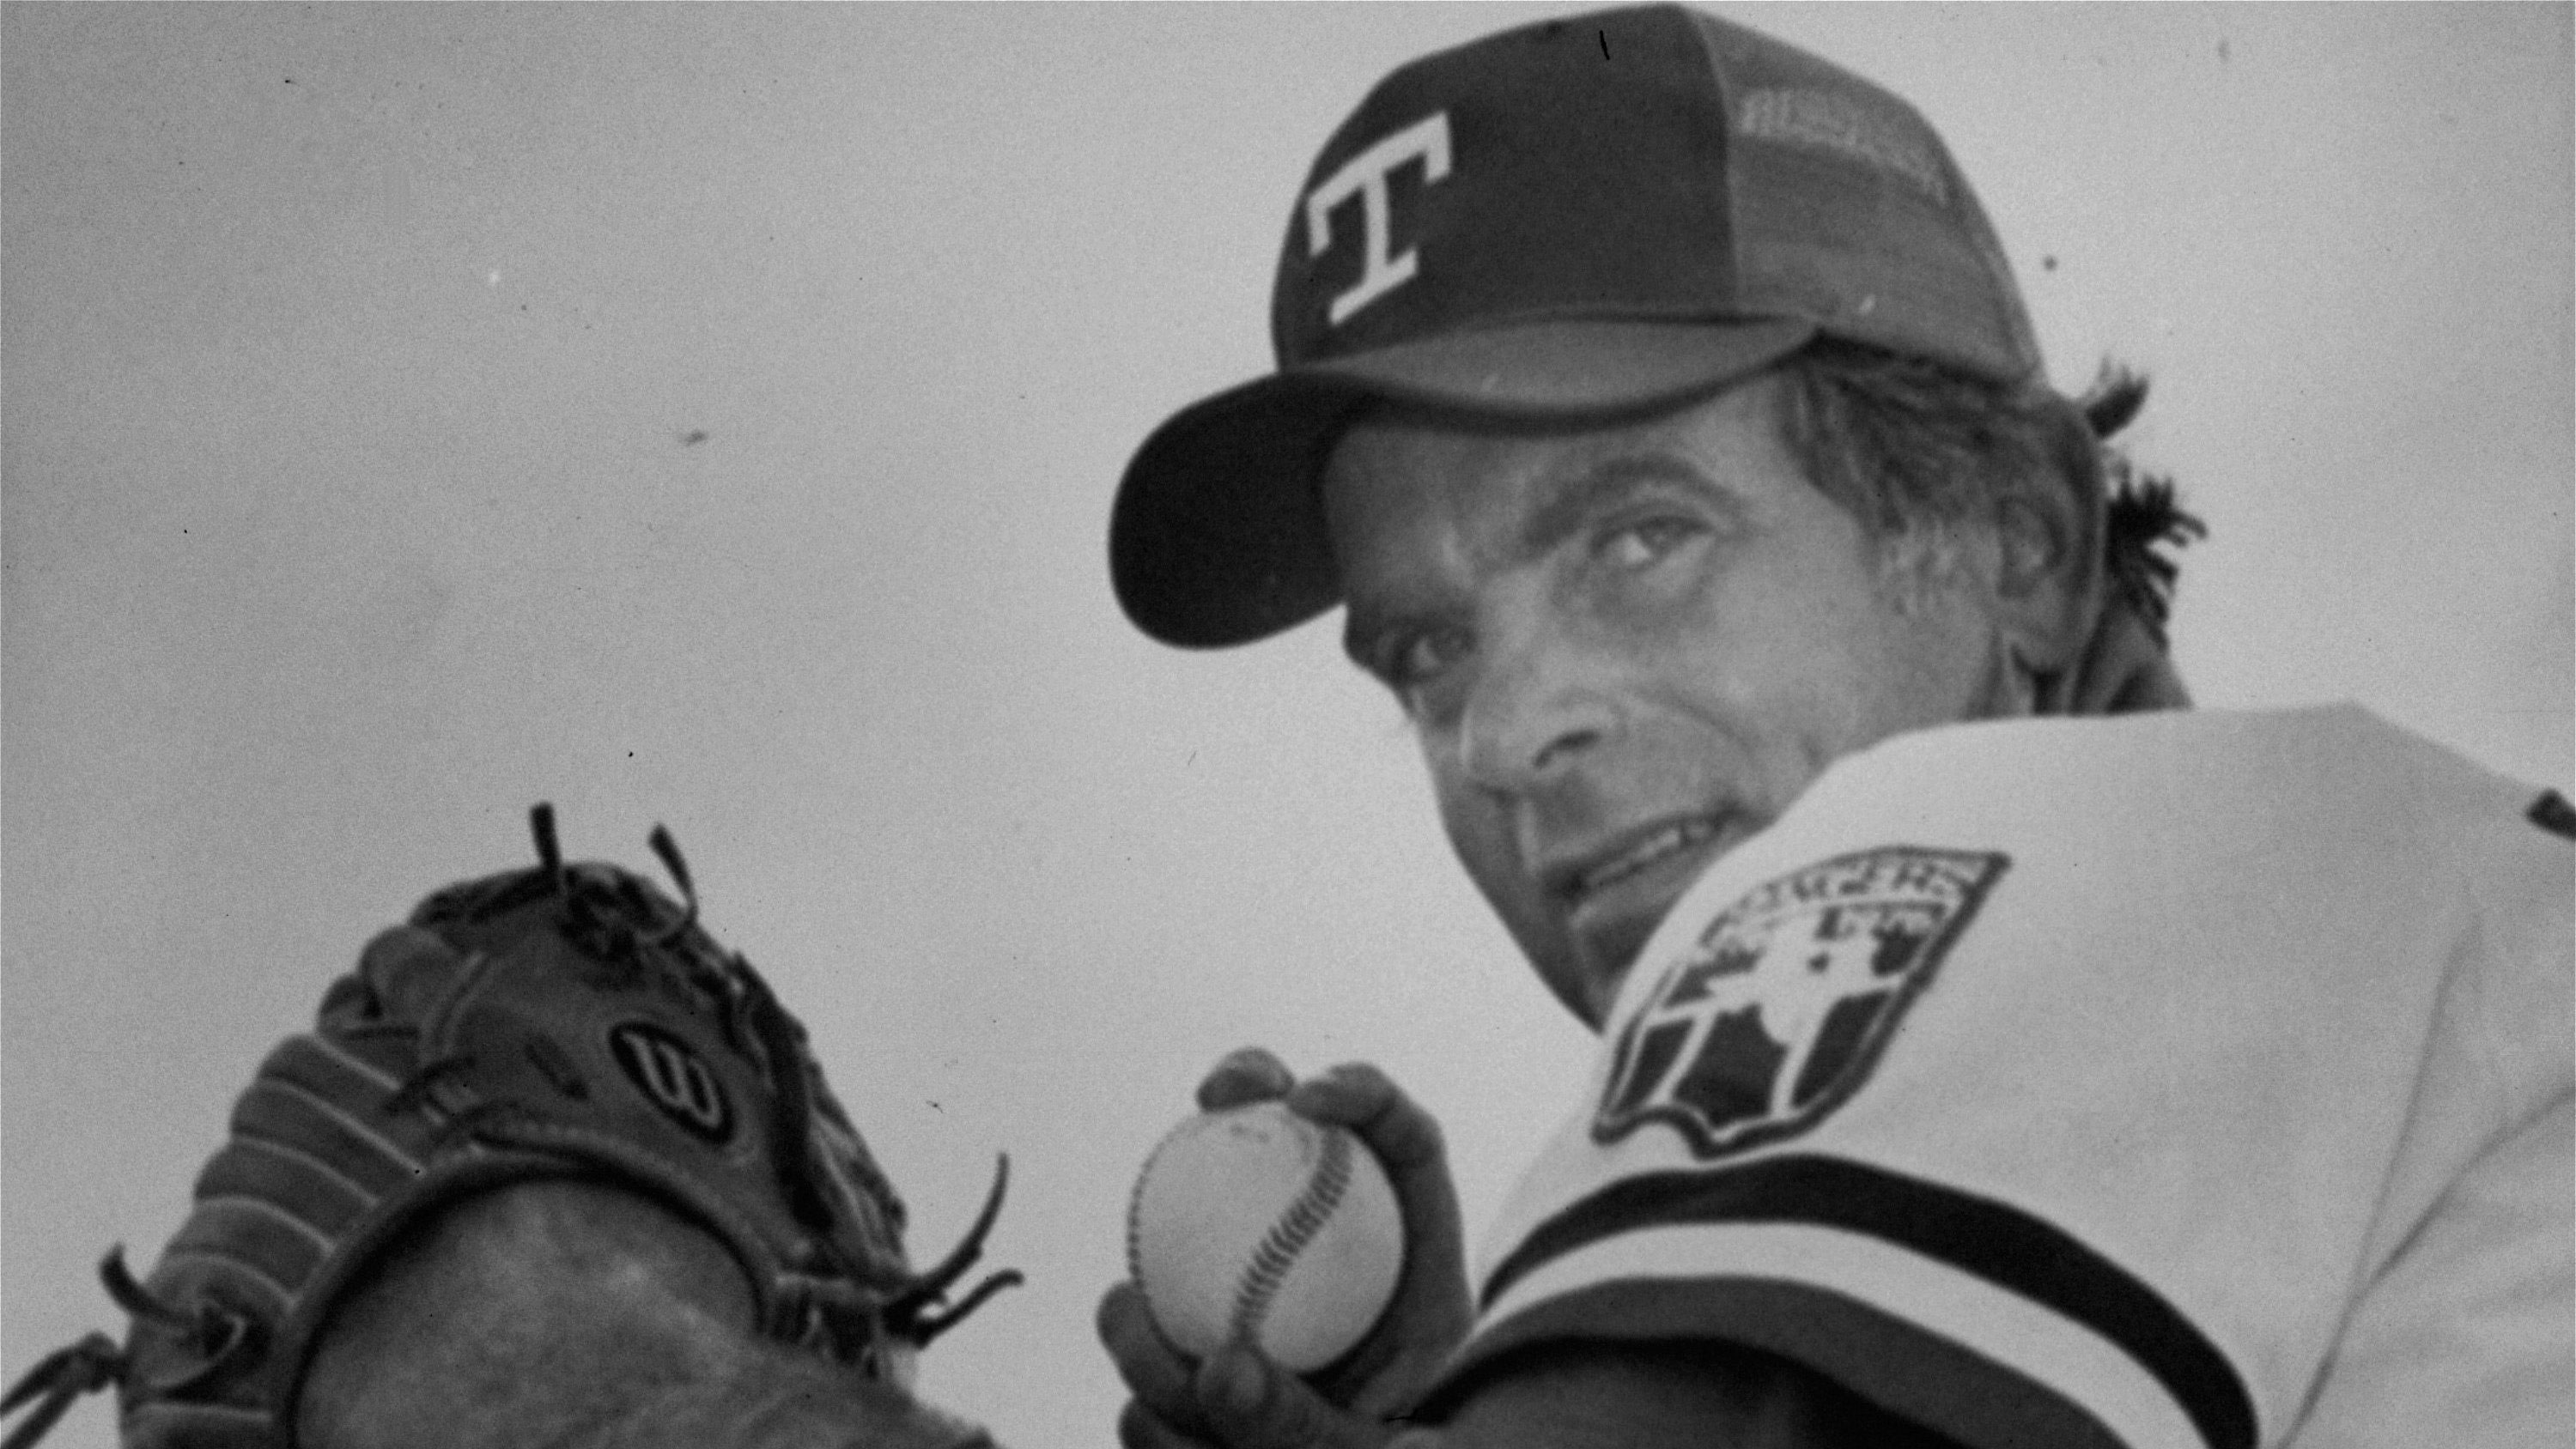 Hall of Fame pitcher Gaylord Perry dies at age 84